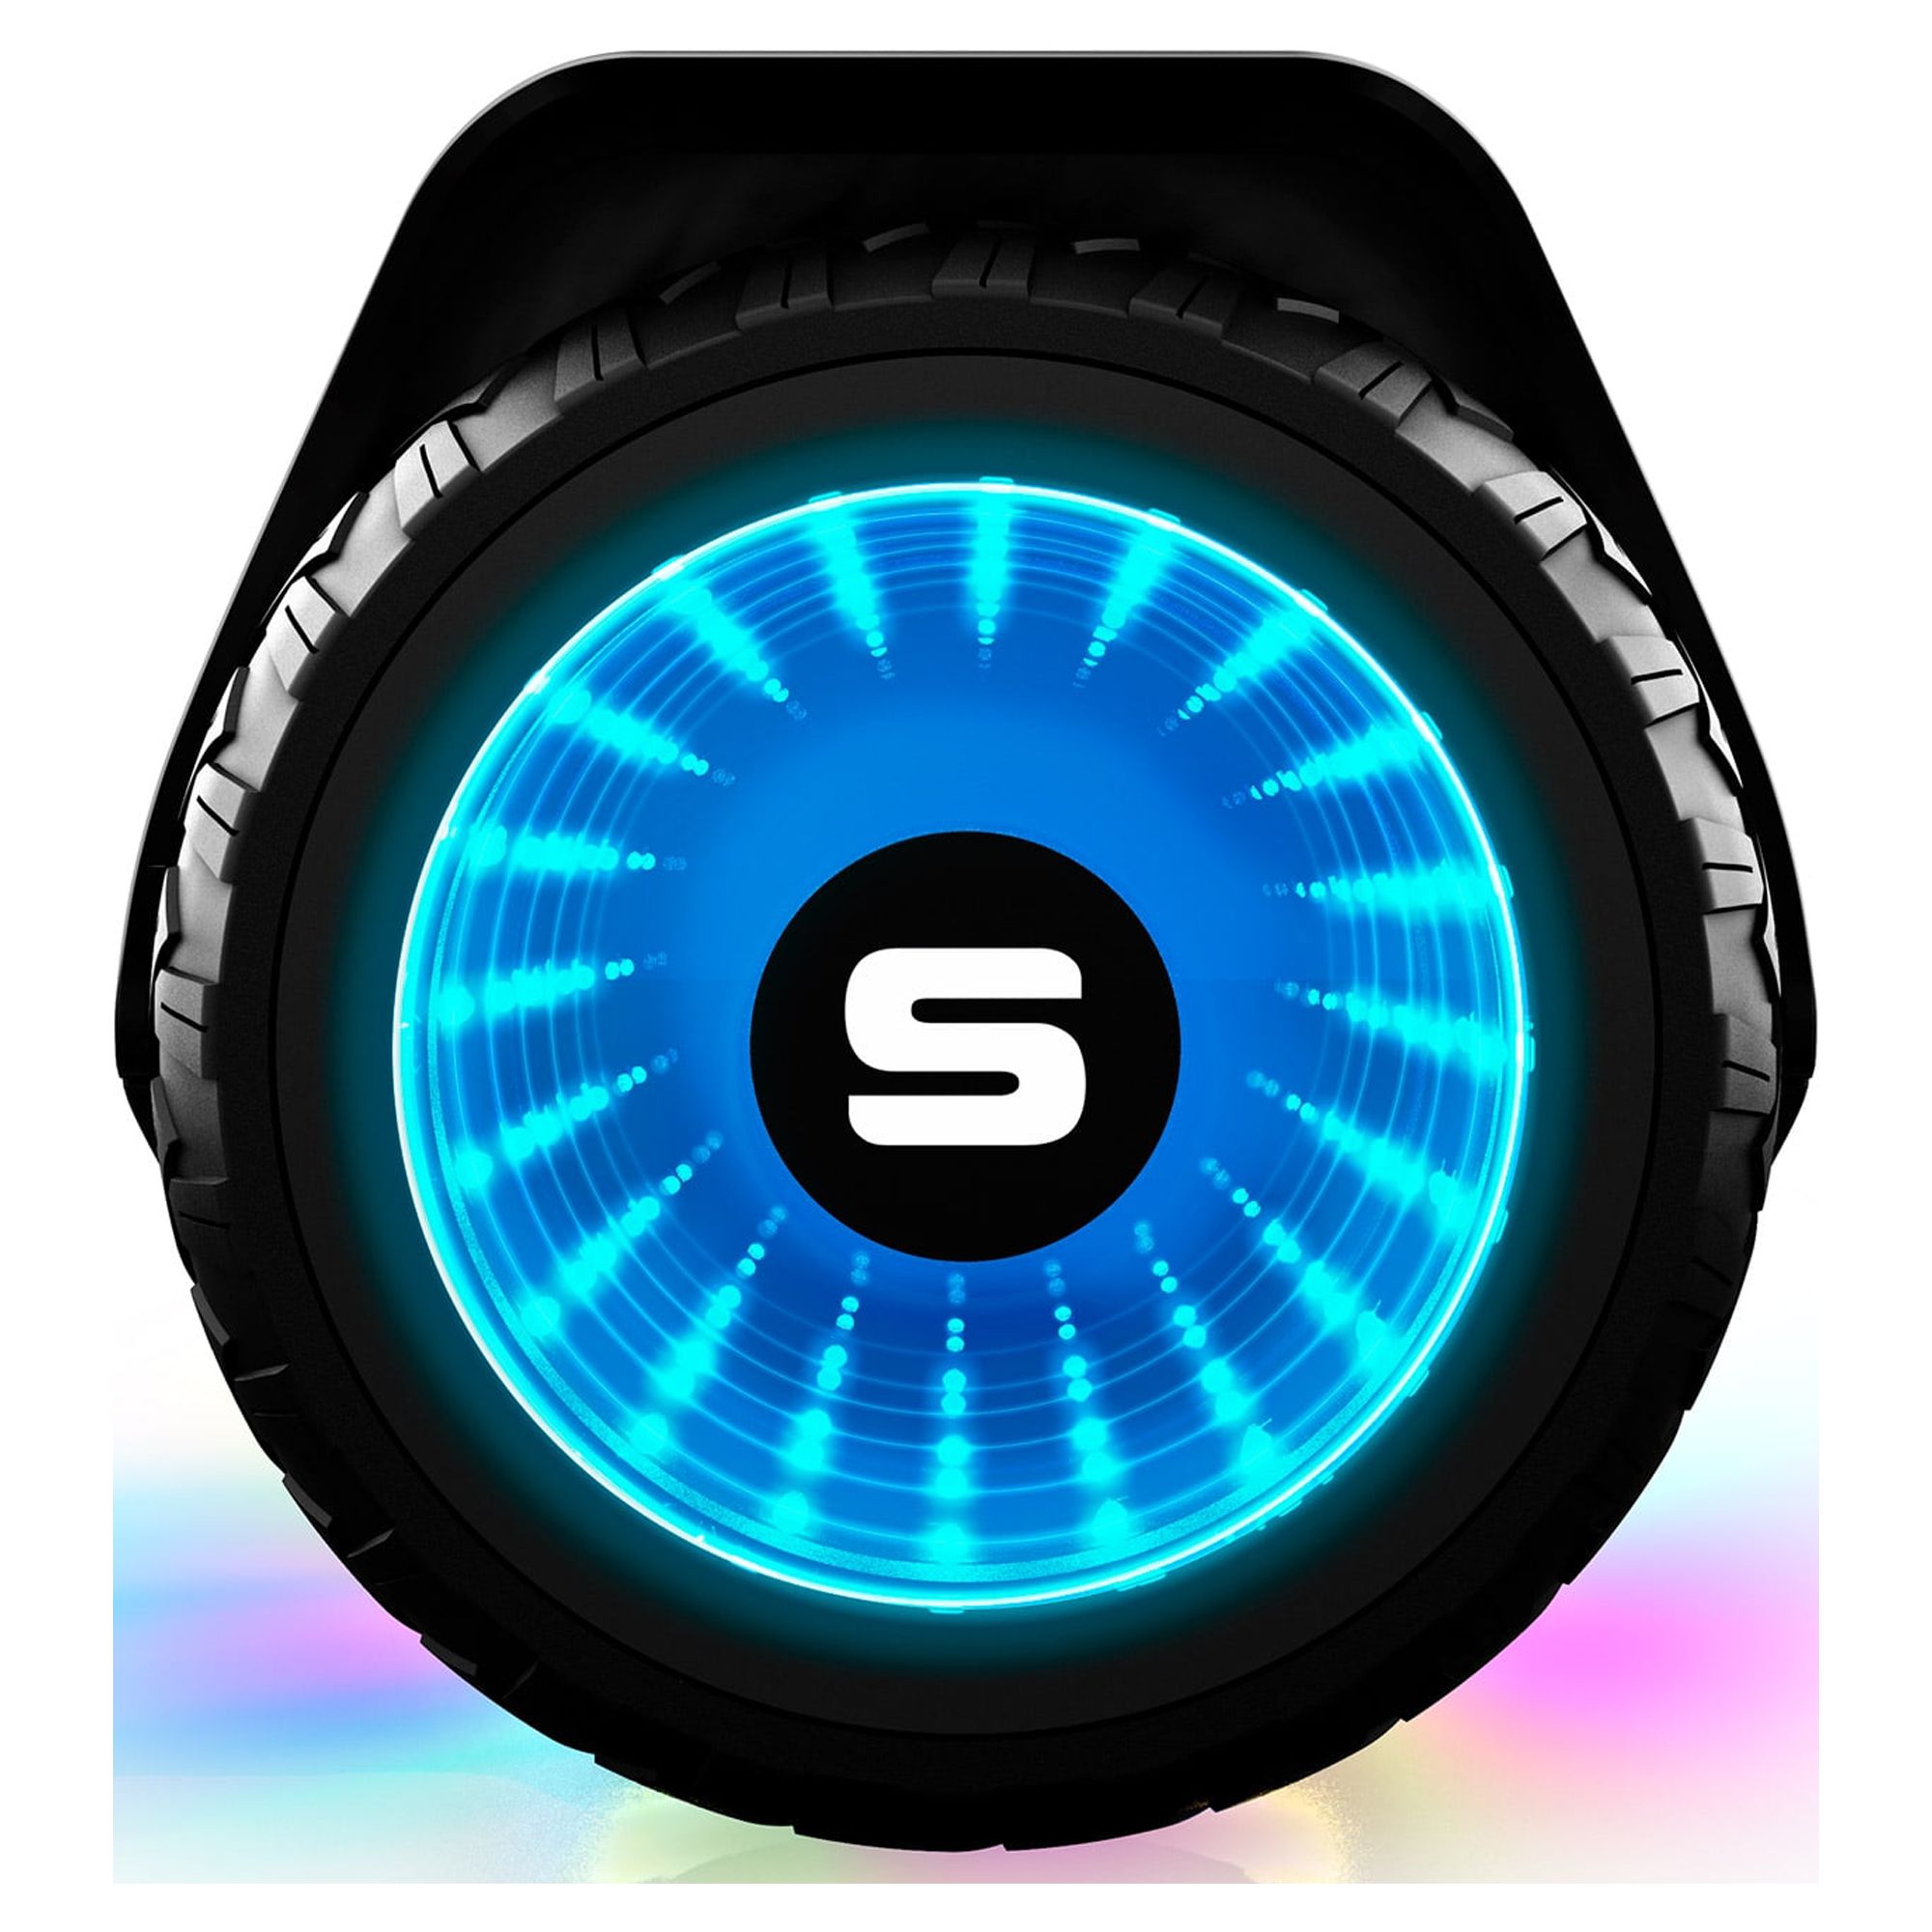 Swagtron Warrior T580 Hoverboard 220 Lbs Black Music-Synced Bluetooth LED Lights 7.5 Mph LiFePo Battery UL-Compliant - image 7 of 9